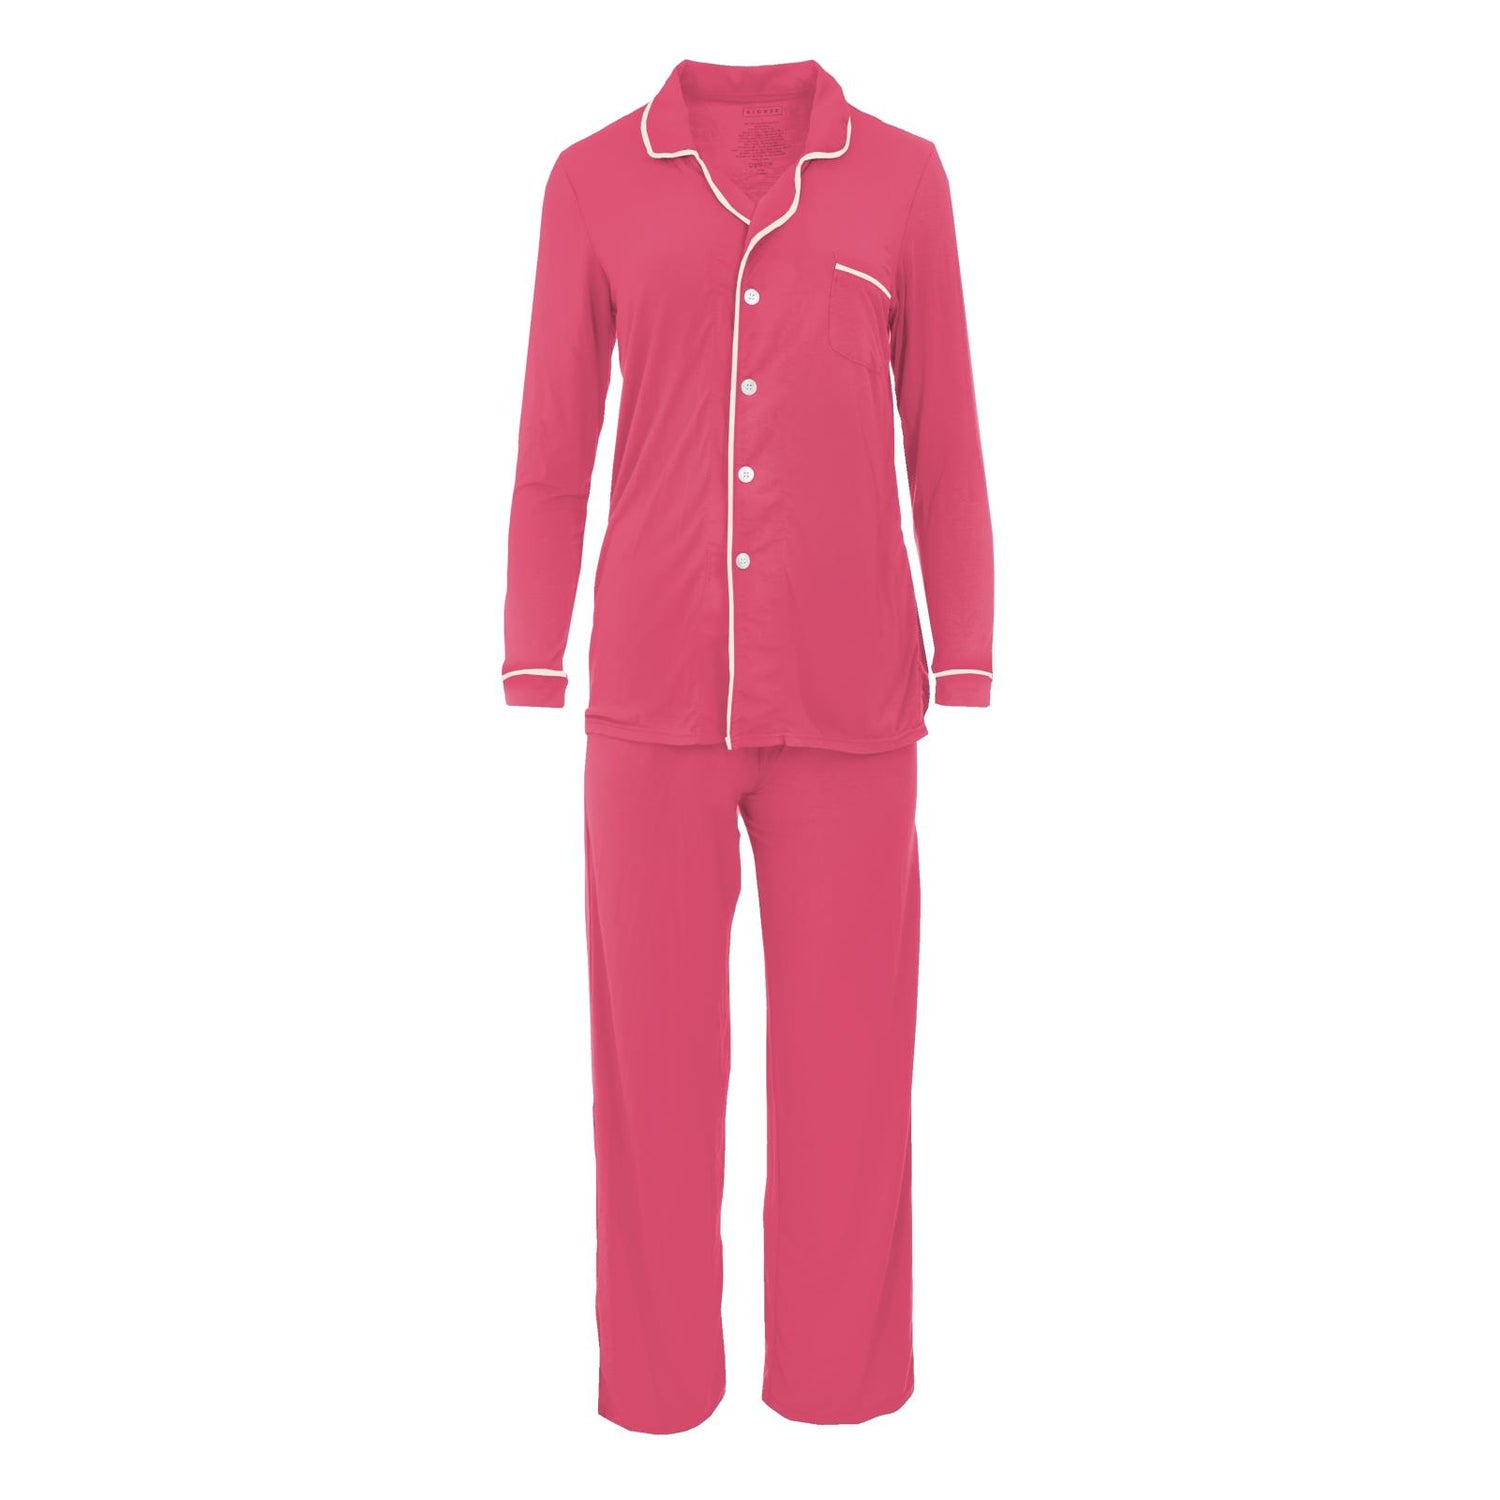 Women's Long Sleeved Collared Pajama Set in Winter Rose with Natural